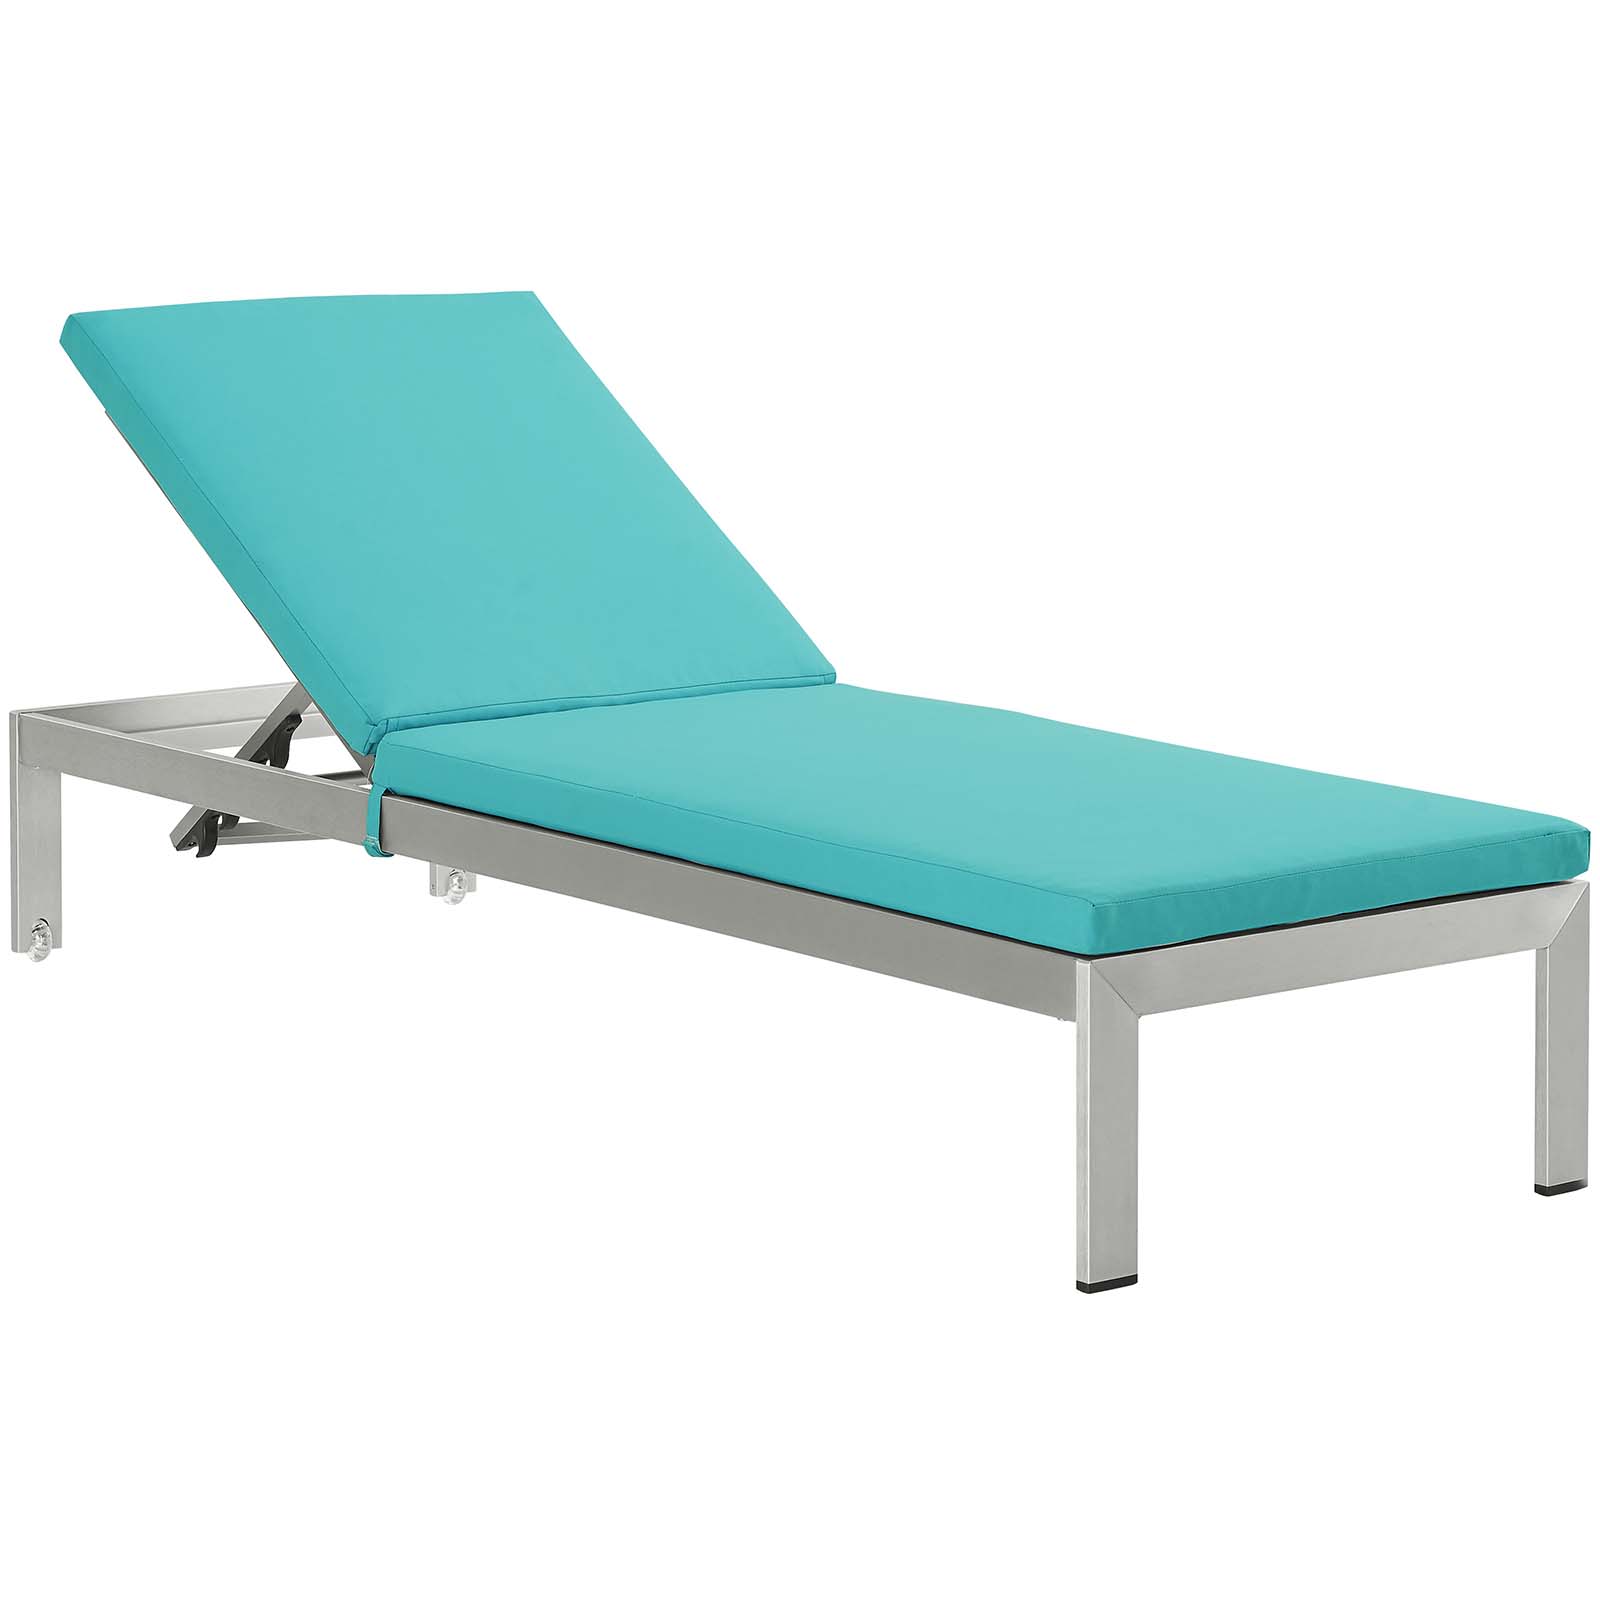 Modern Contemporary Urban Design Outdoor Patio Balcony Three PCS Chaise Lounge Chair, Blue, Aluminum - image 3 of 8